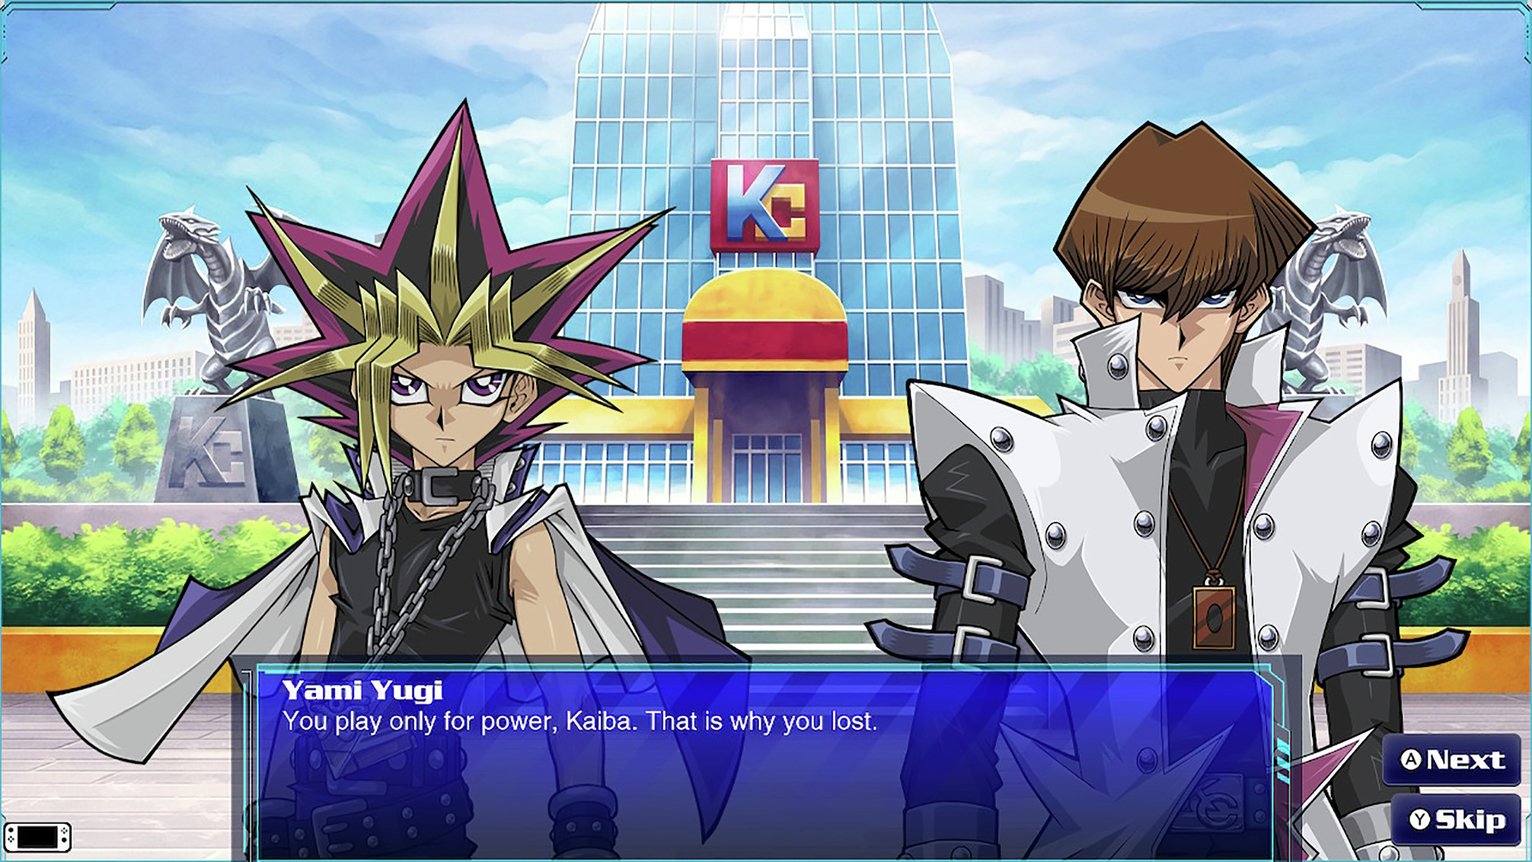 Yu-Gi-Oh! Legacy of the Duelist Link Evolution Switch Game Review